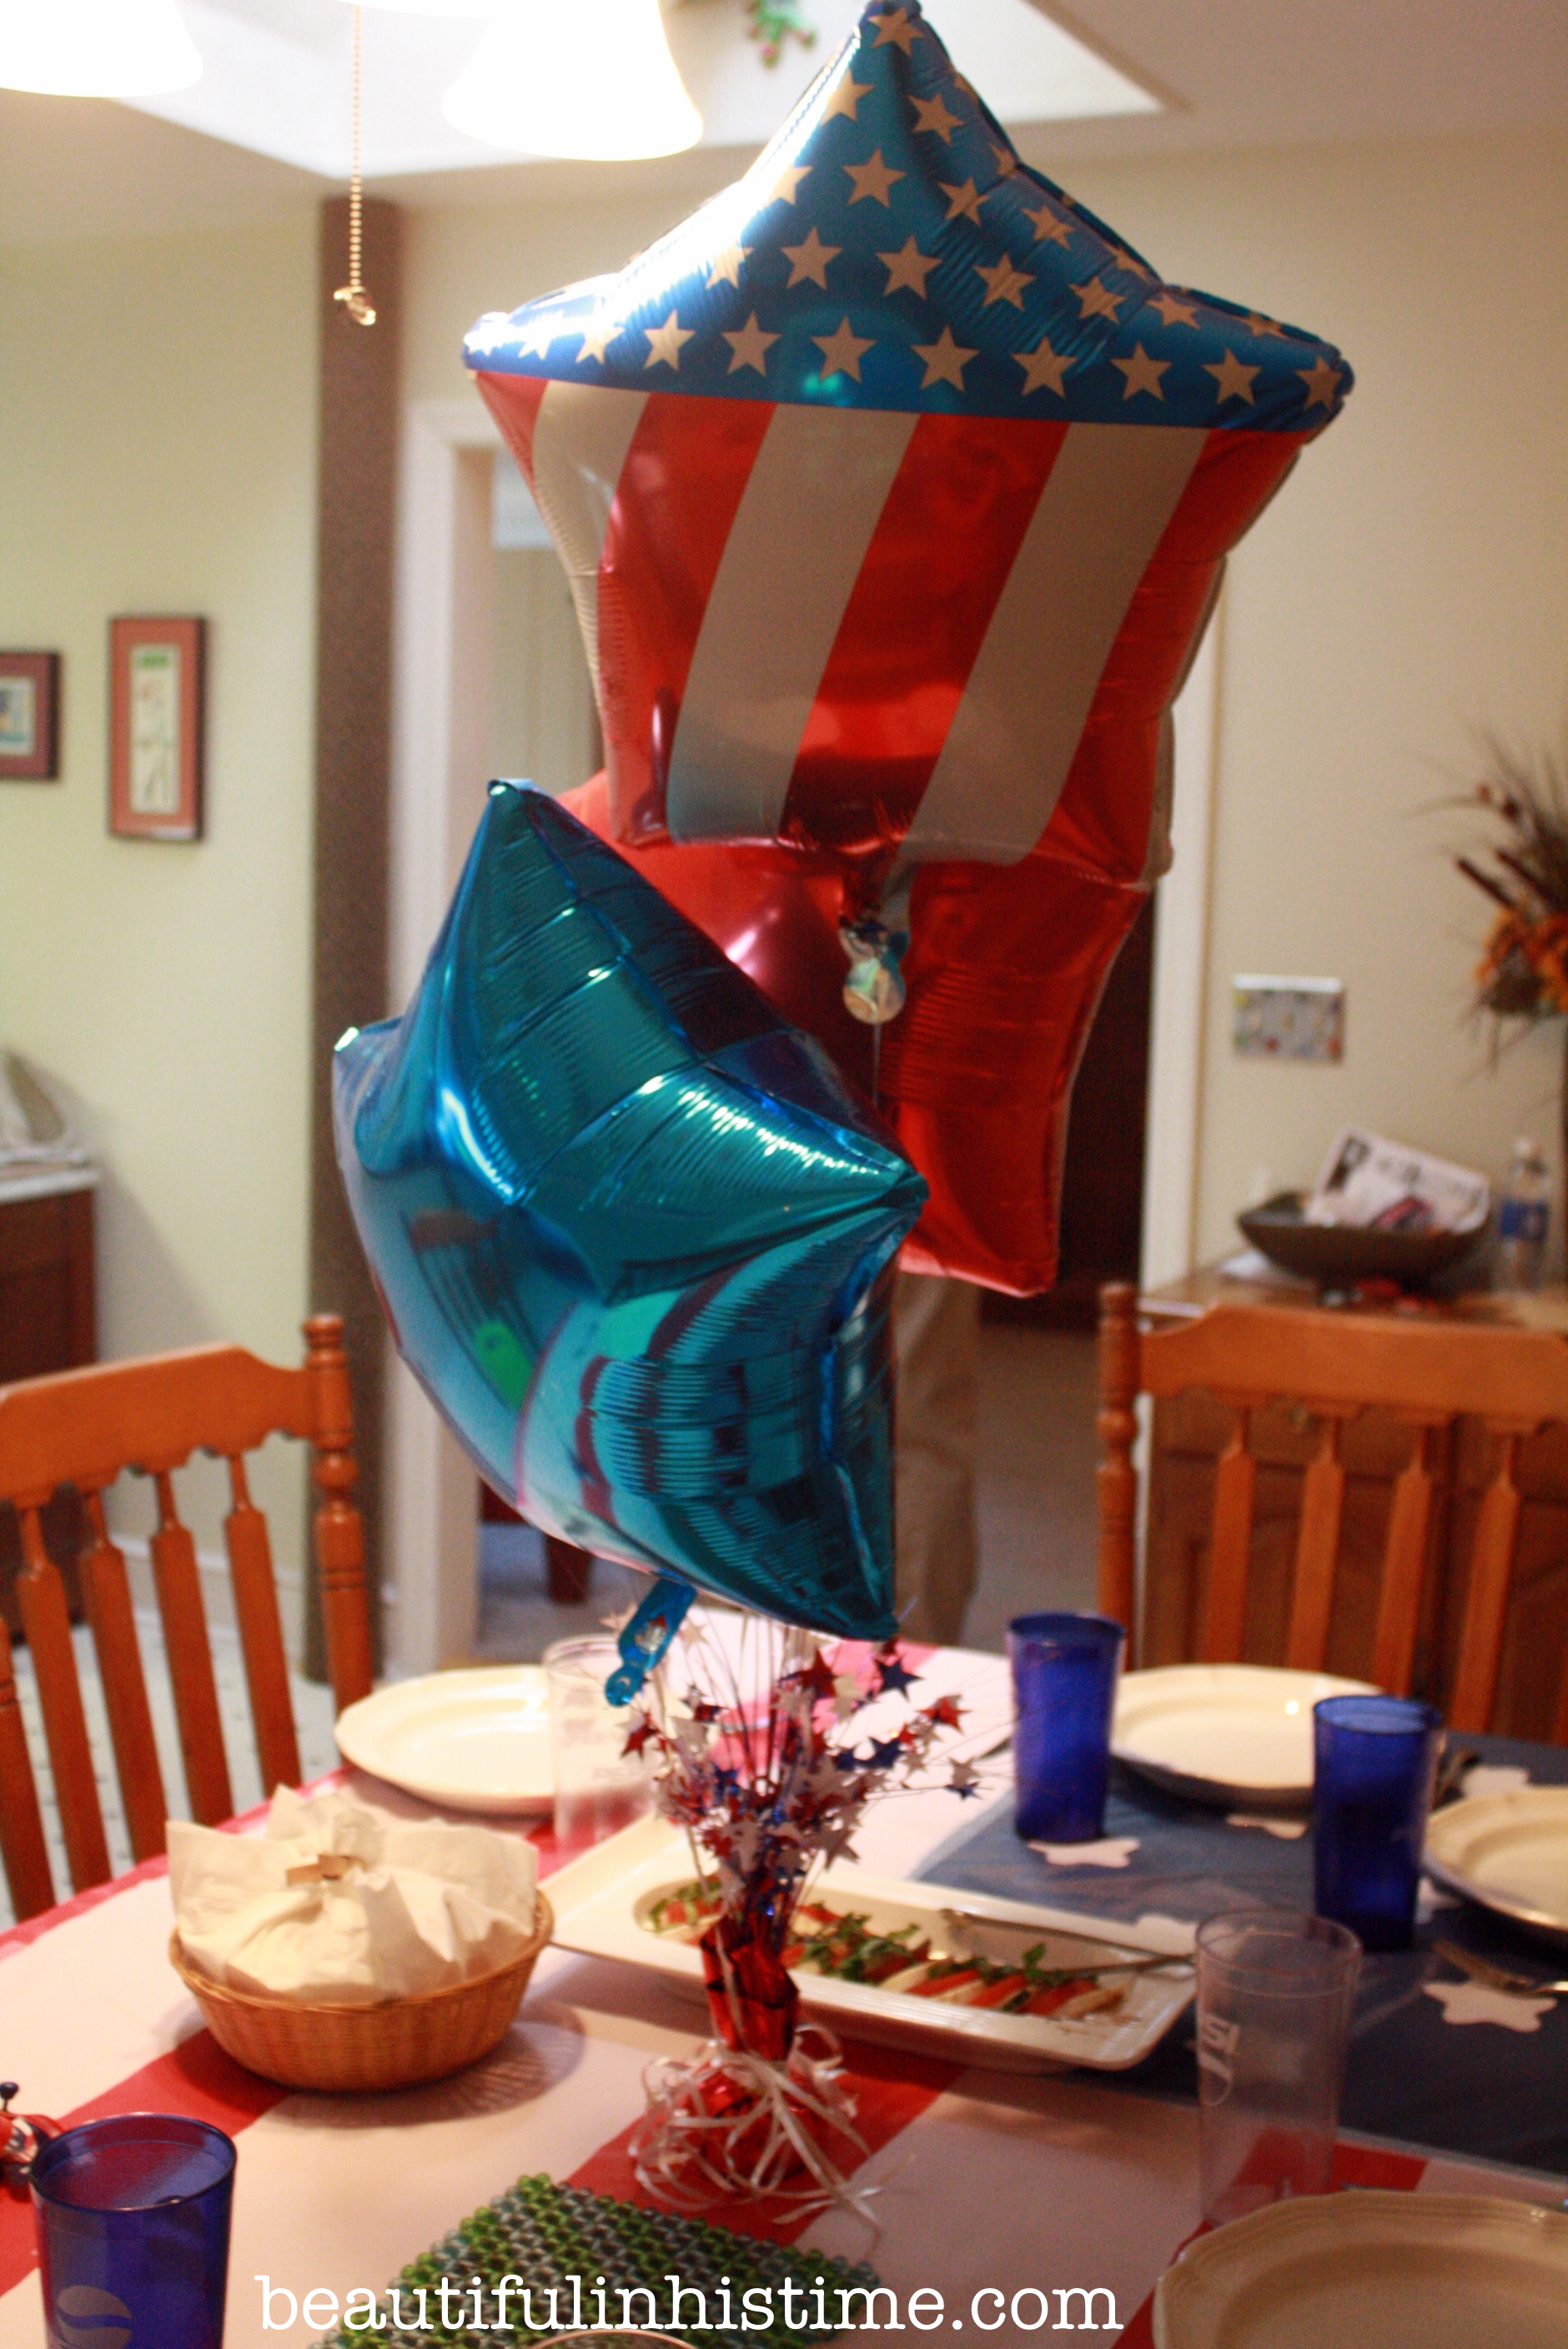 A Birthday Party for America! #birthday #america #4thofjuly #independenceday #party #birthdayparty #balloons